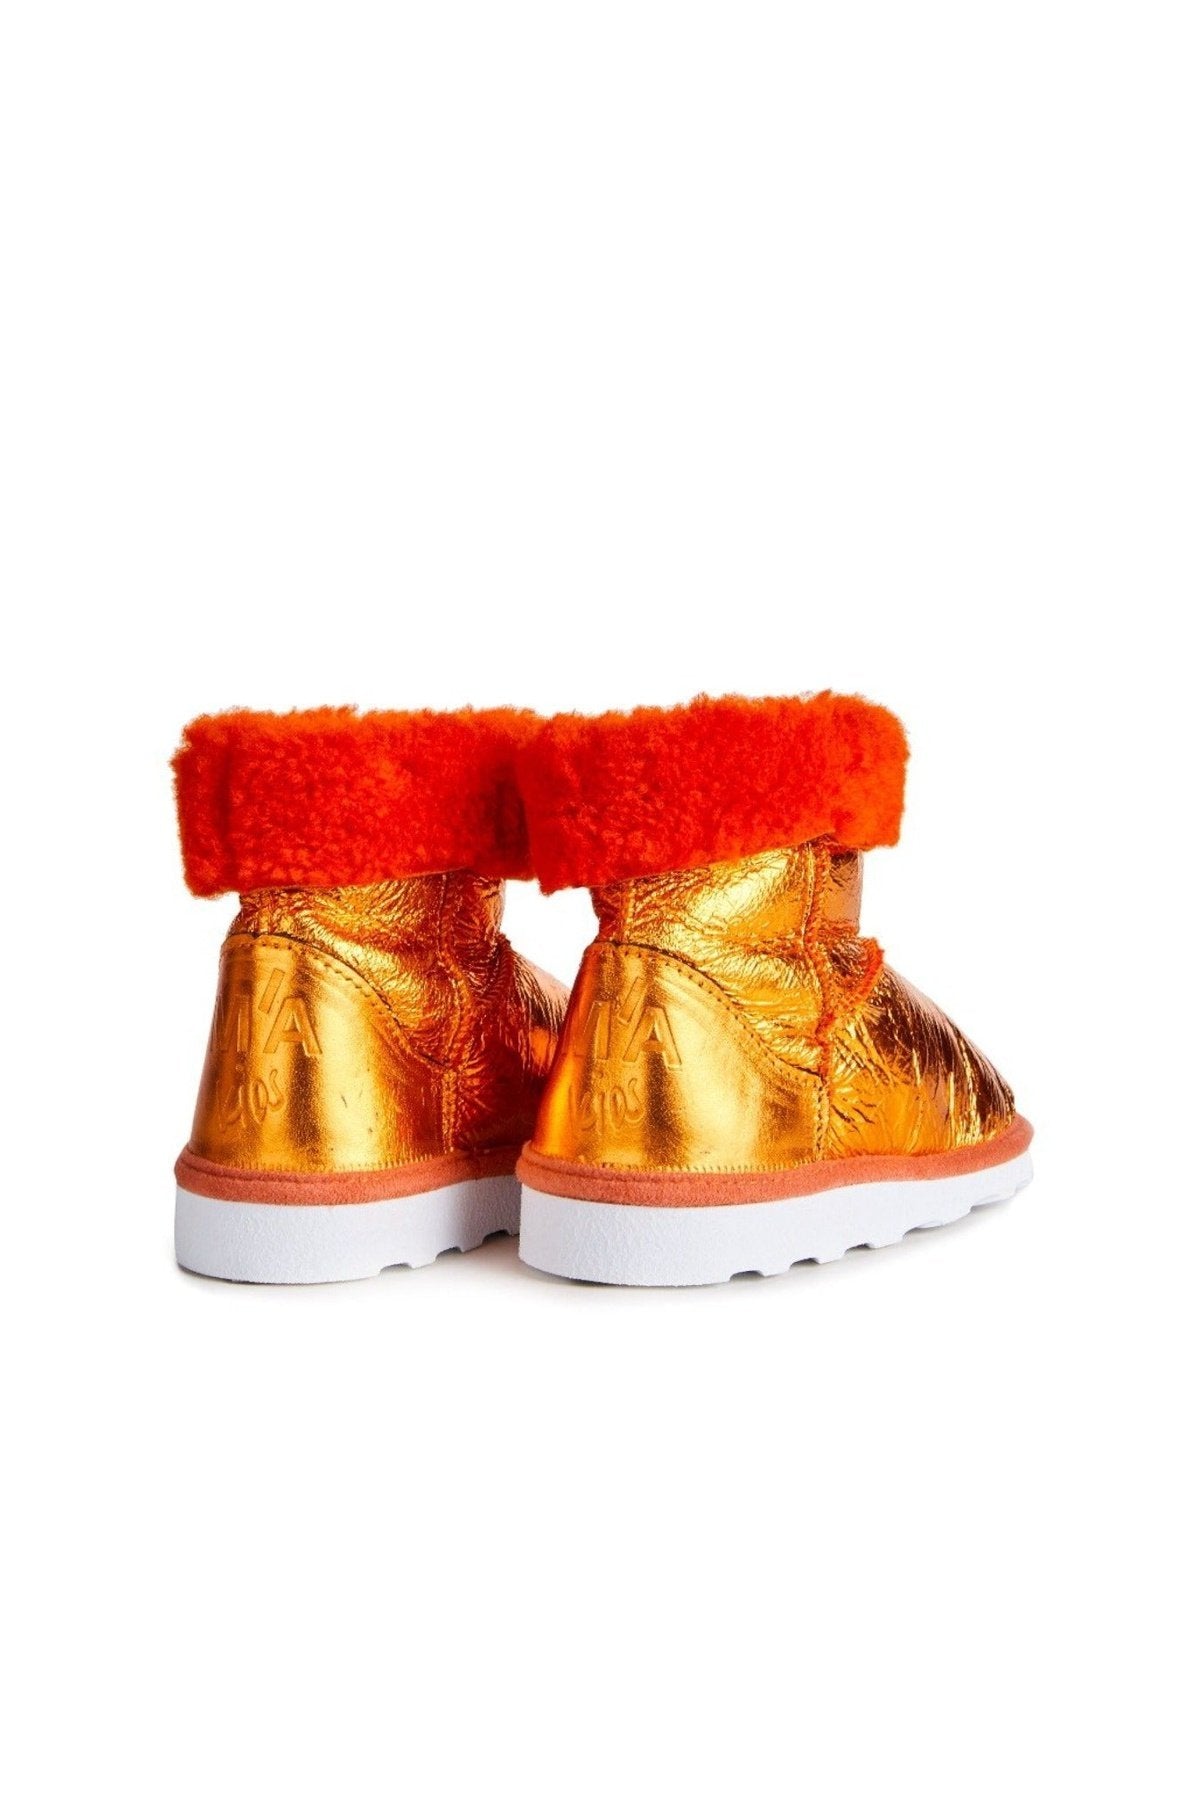 M'A KIDS LEATHER BOOTS IN ORANGE